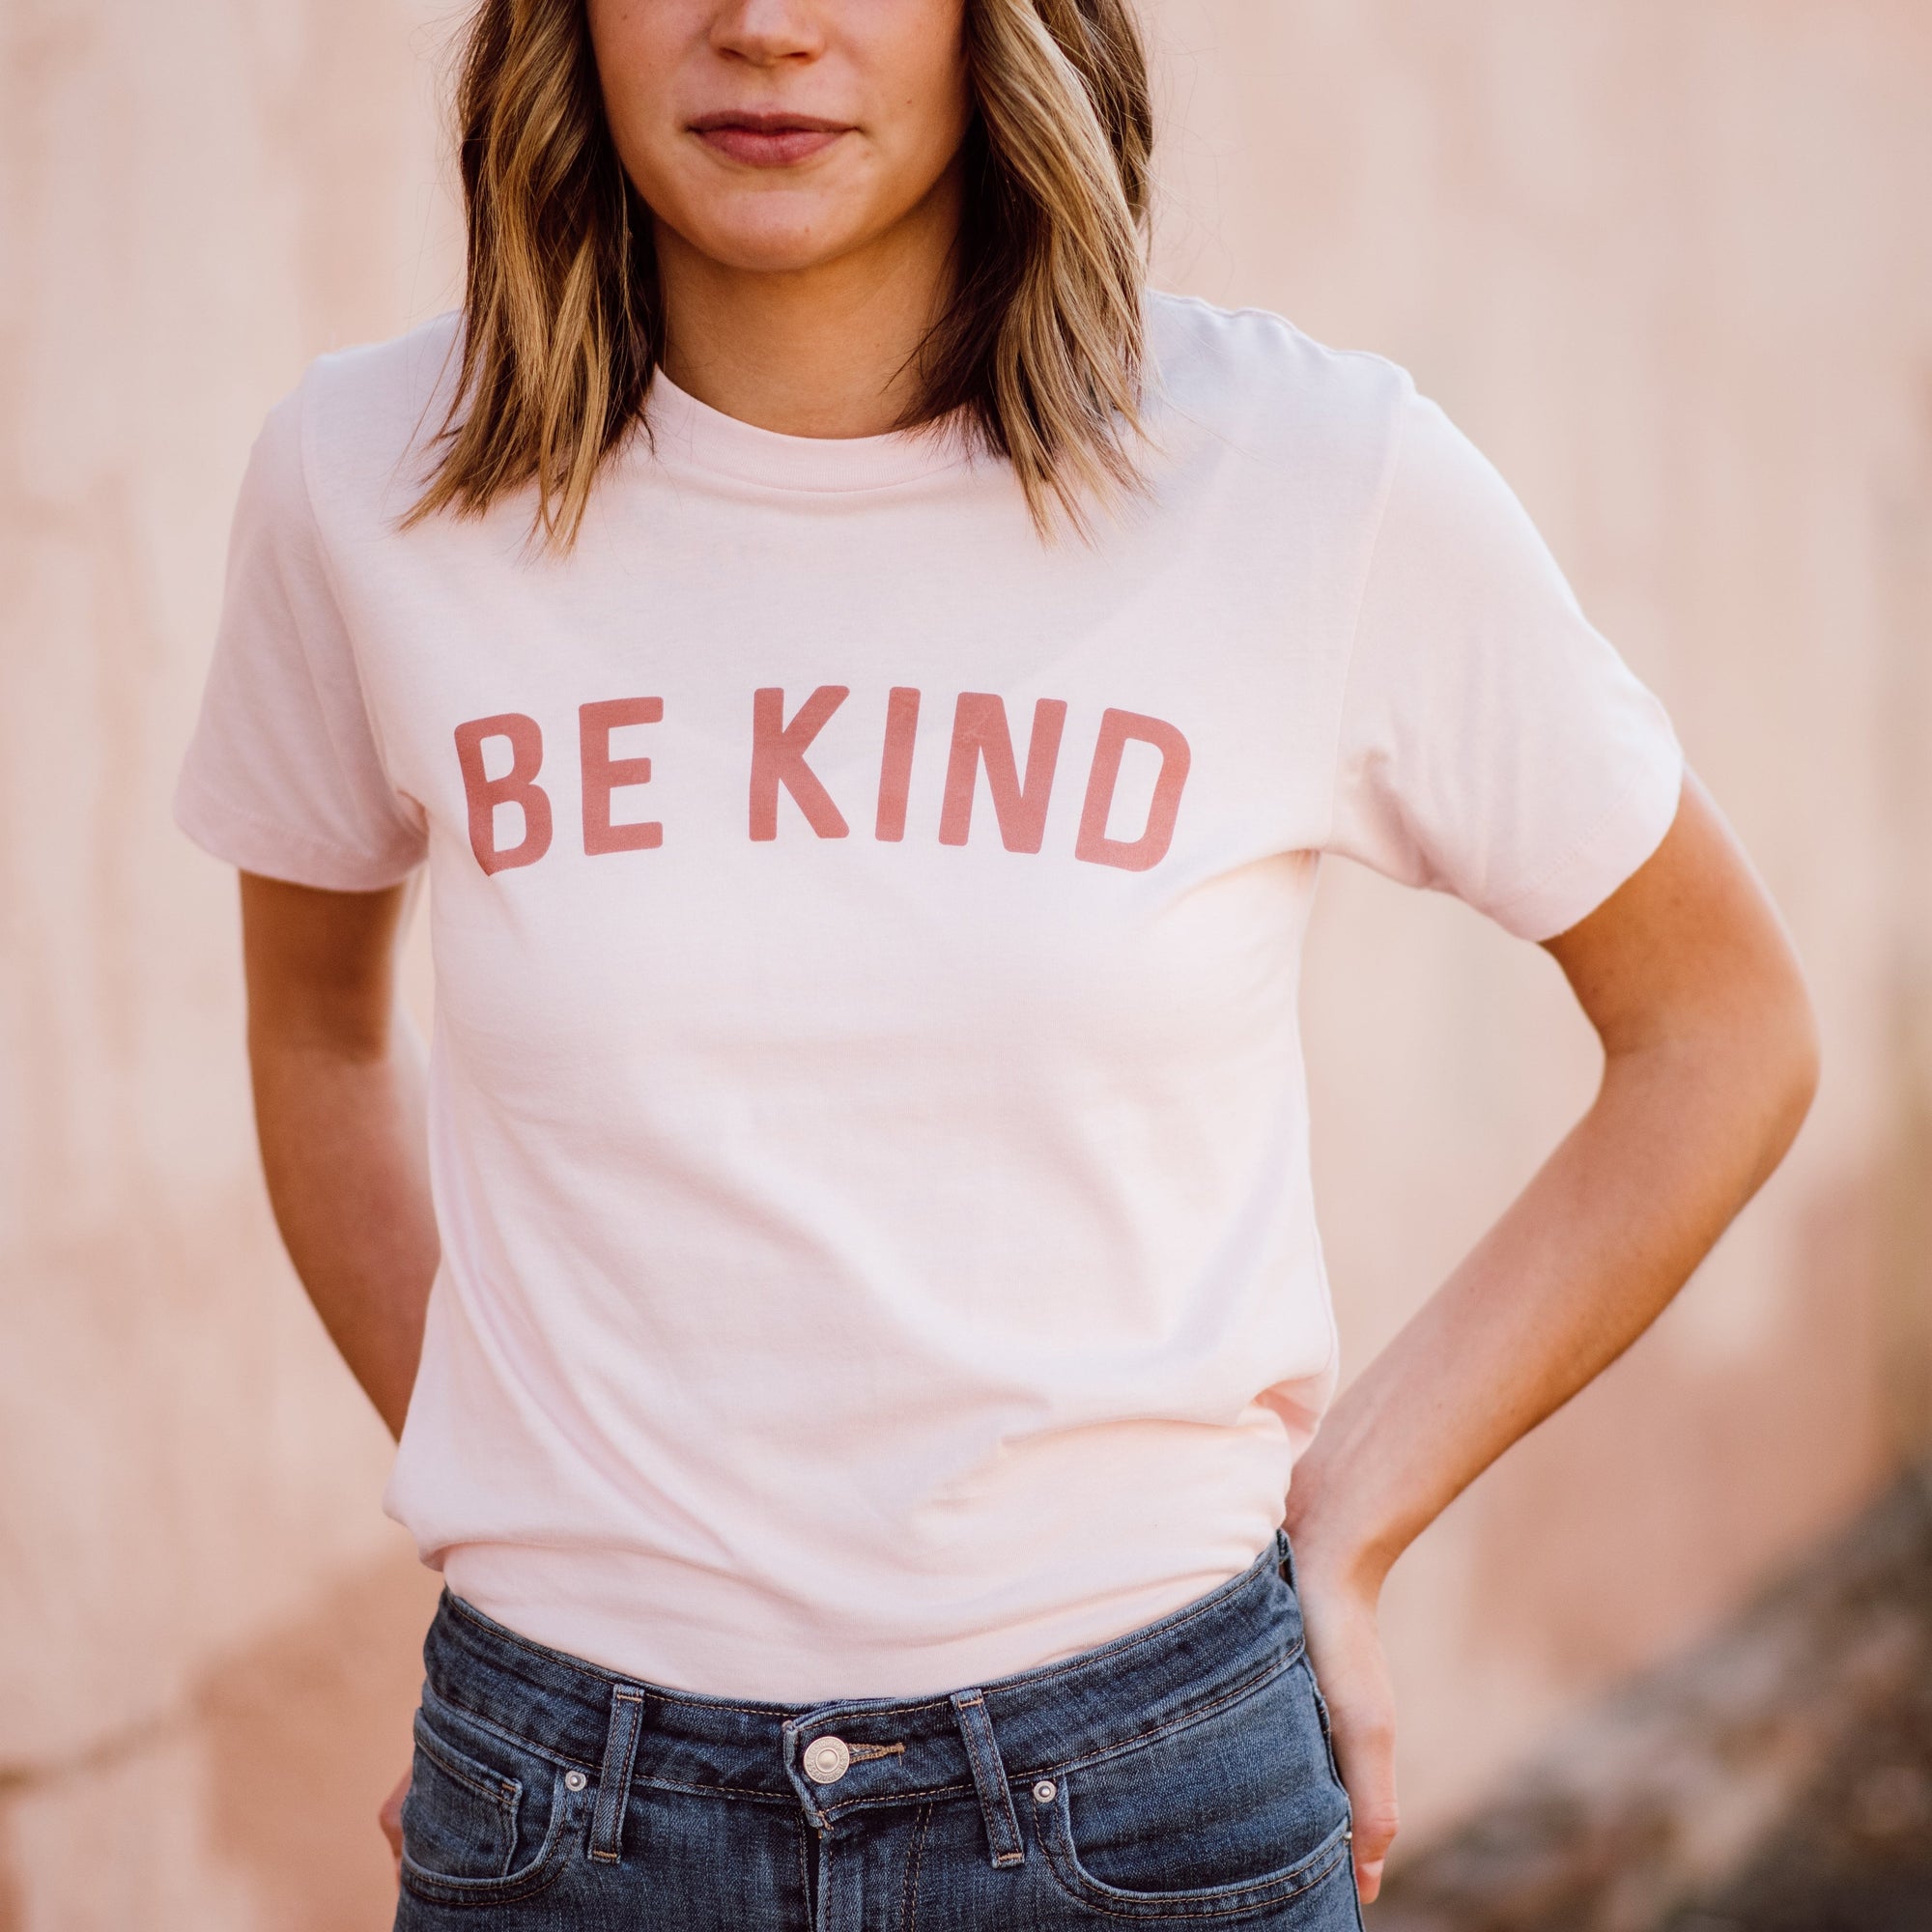 Be Kind Tee womens August Ink 